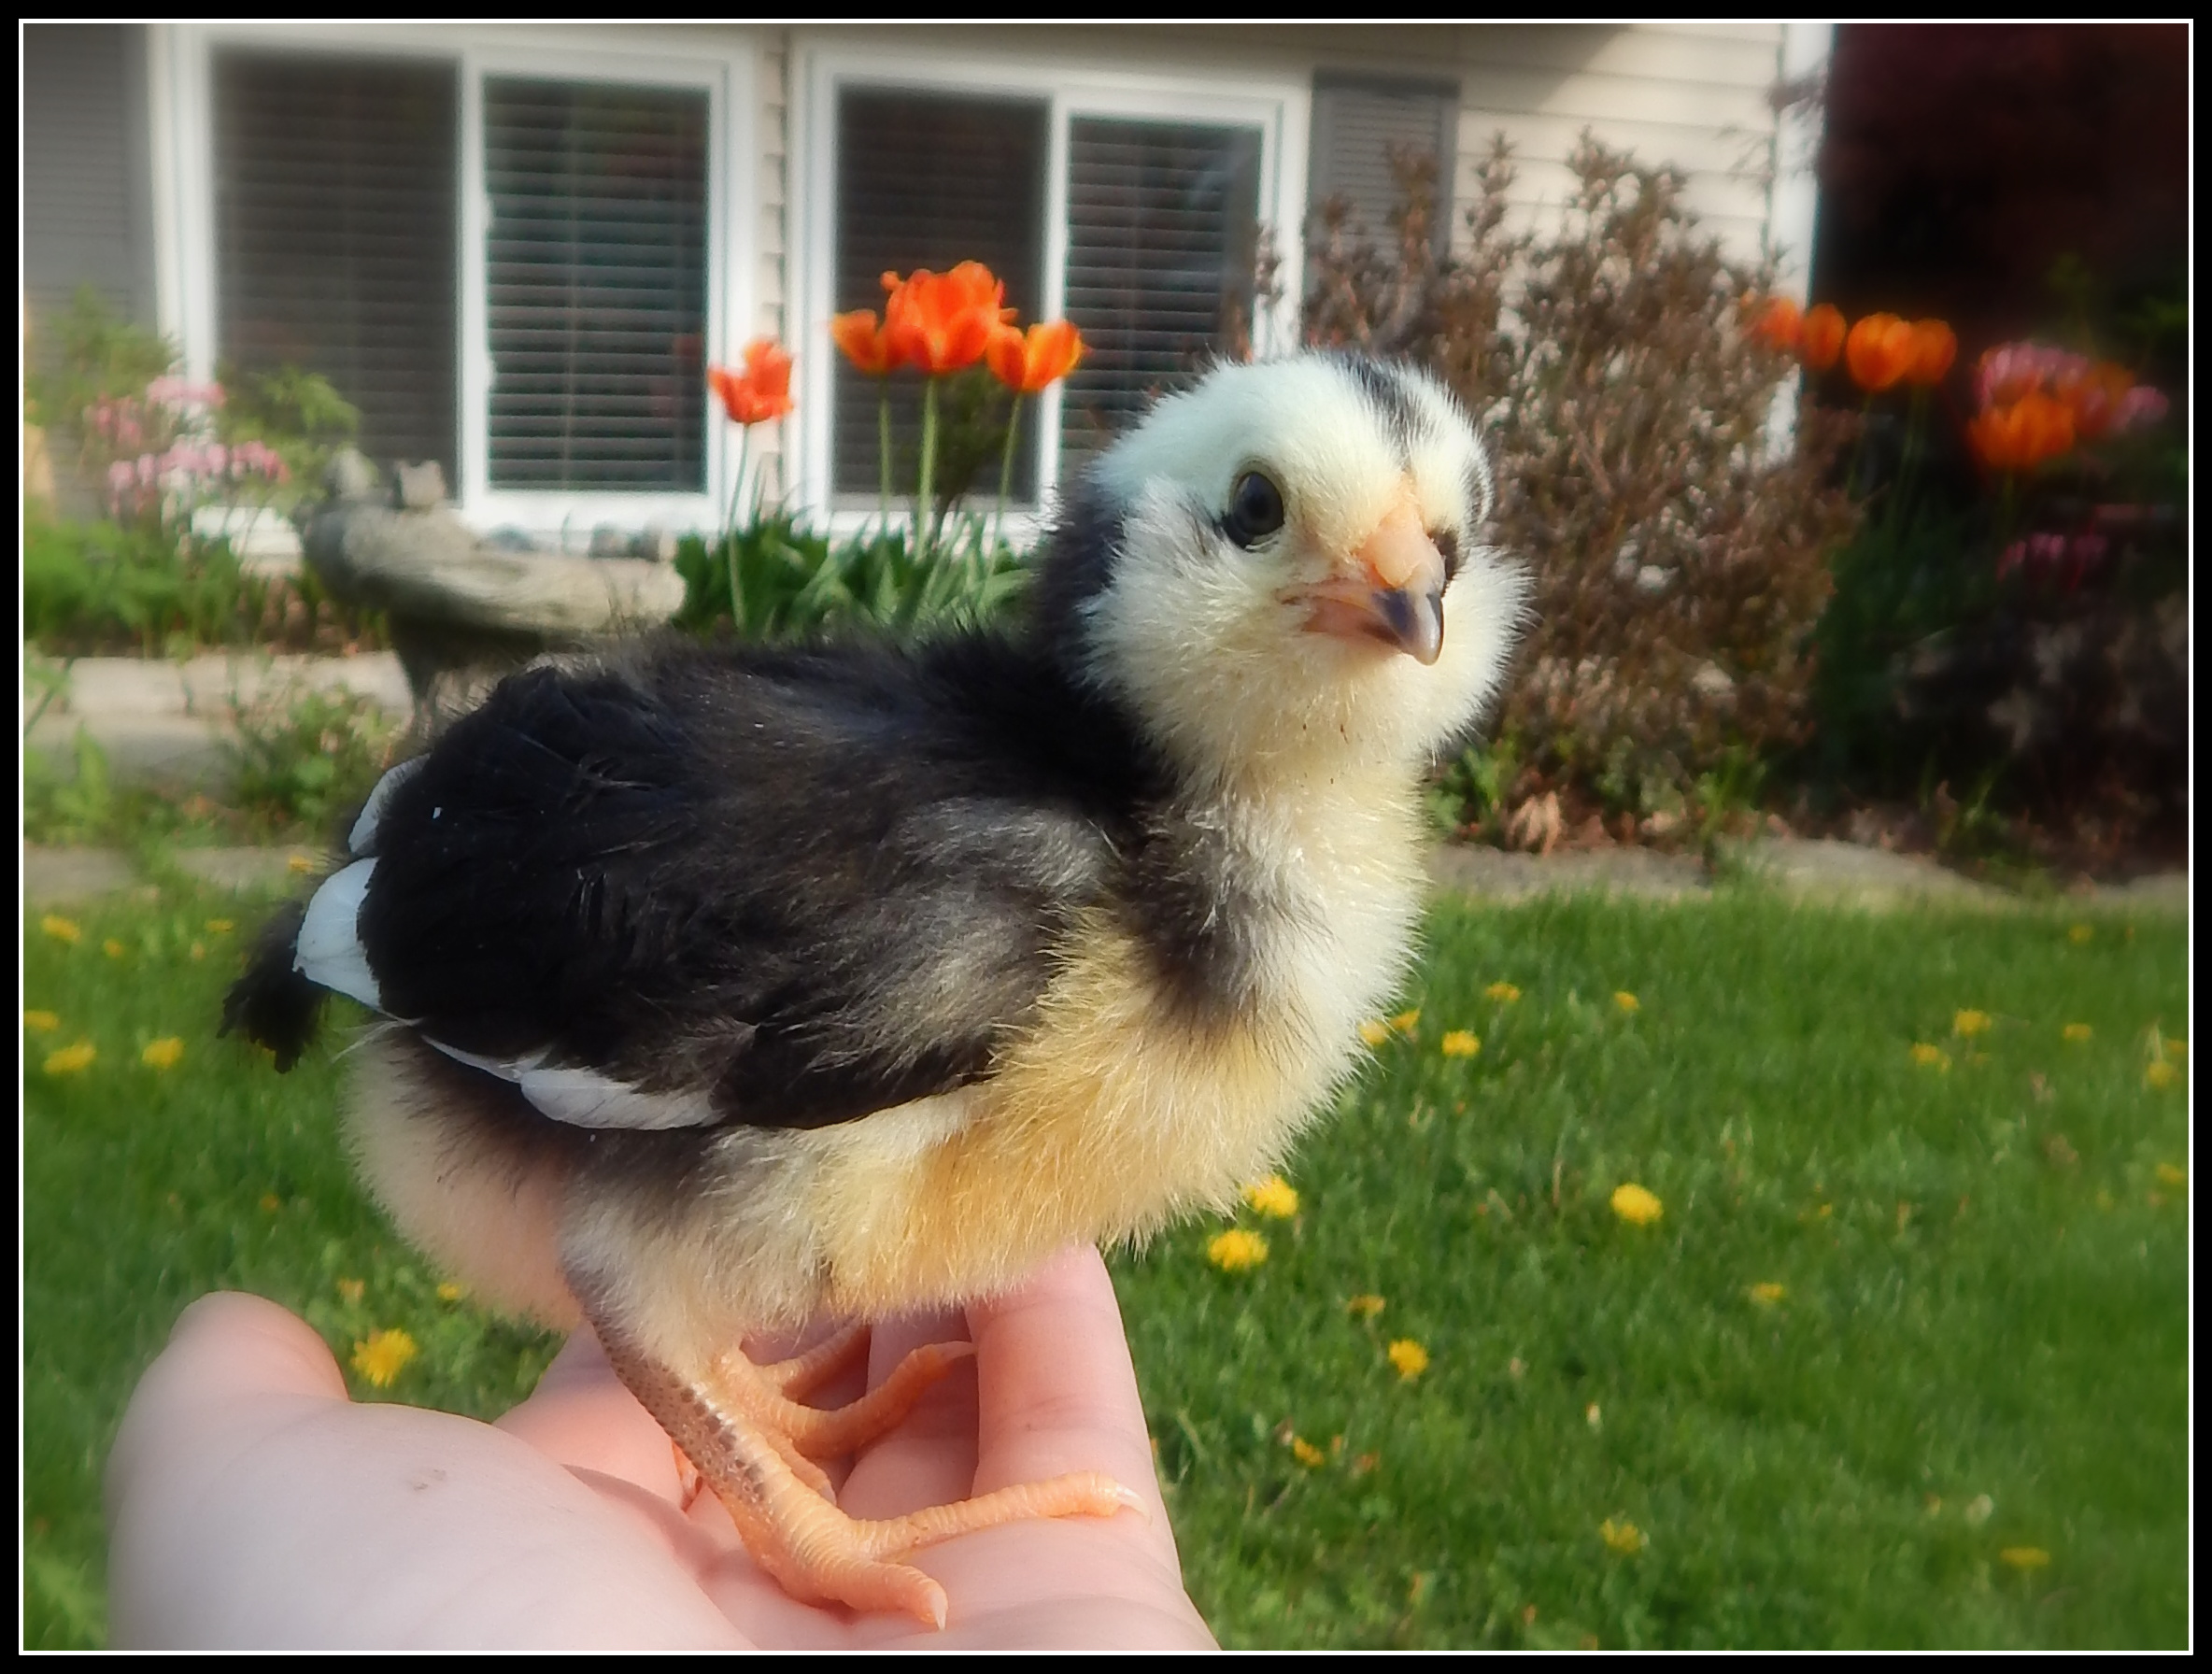 9 day old Blue Ameraucana......she kept coming over to me for snuggles instead of photos, so we compromised.